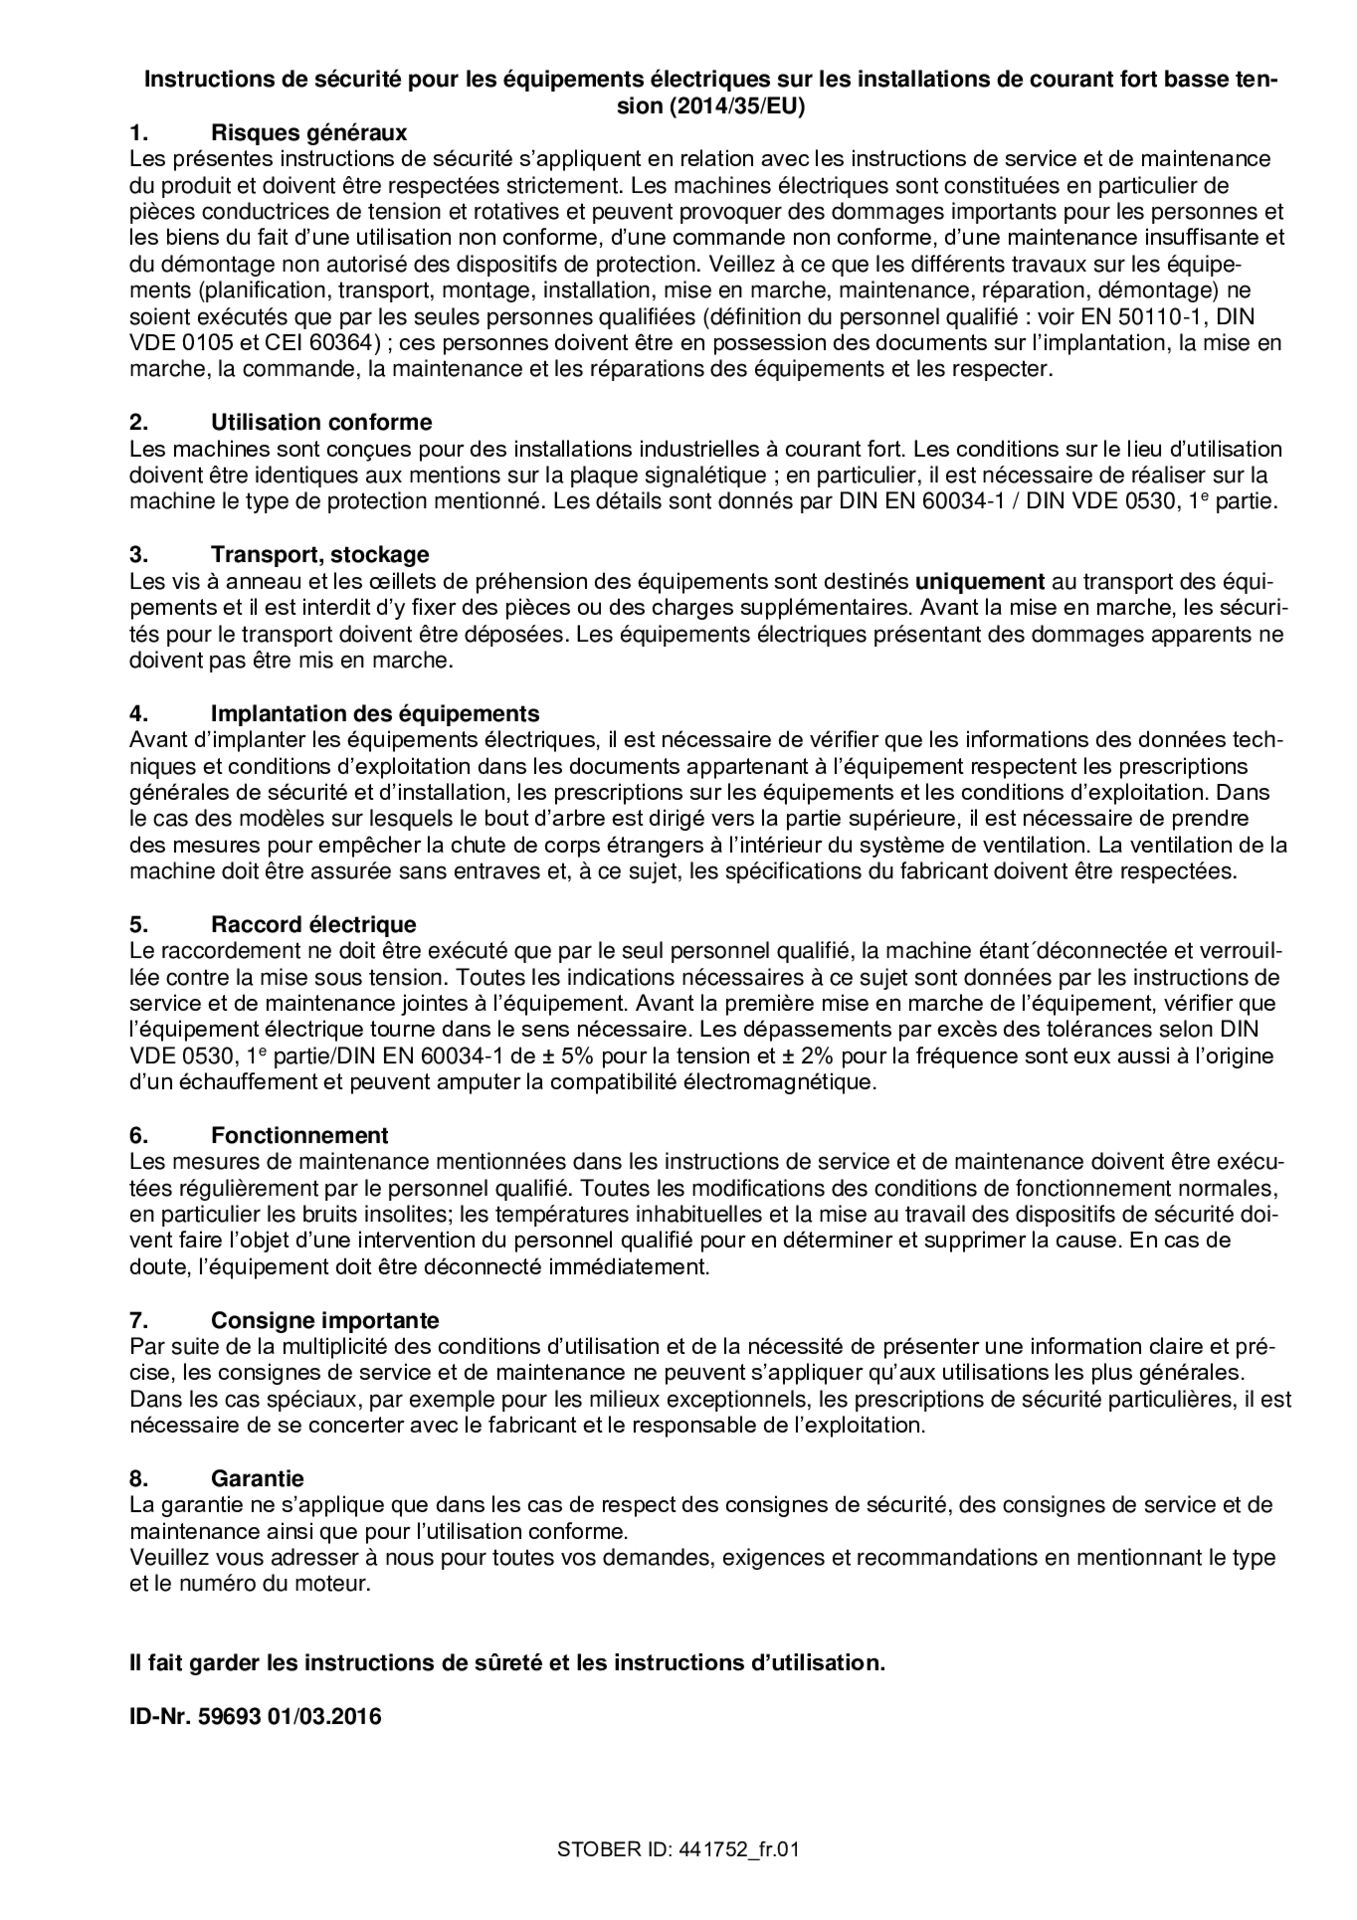 Safety instructions for electrical equipment (VEM)